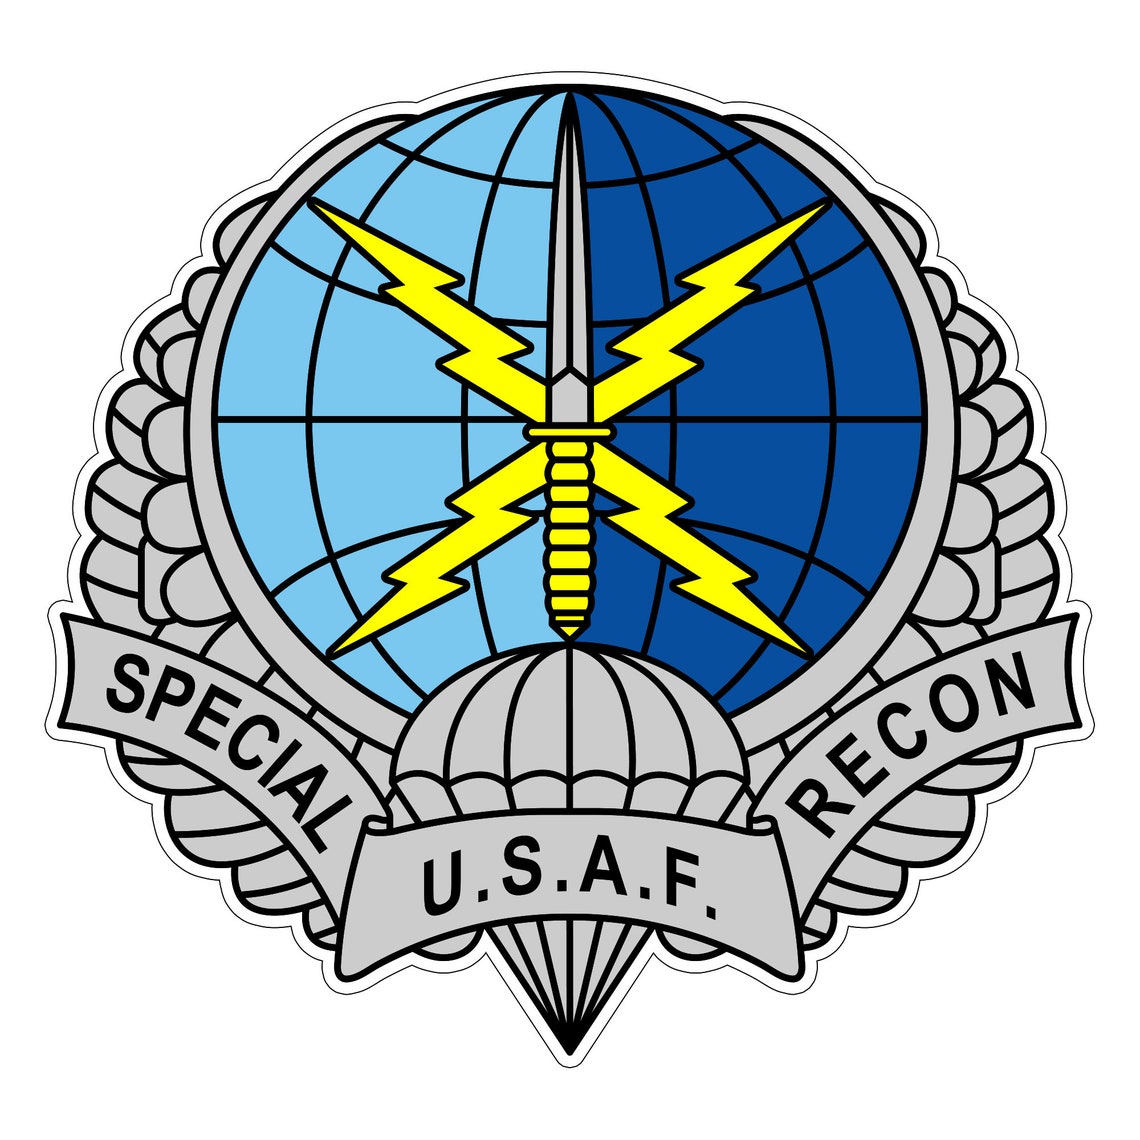 Special Reconnaissance Stickers AFSOC 07142019A - Etsy